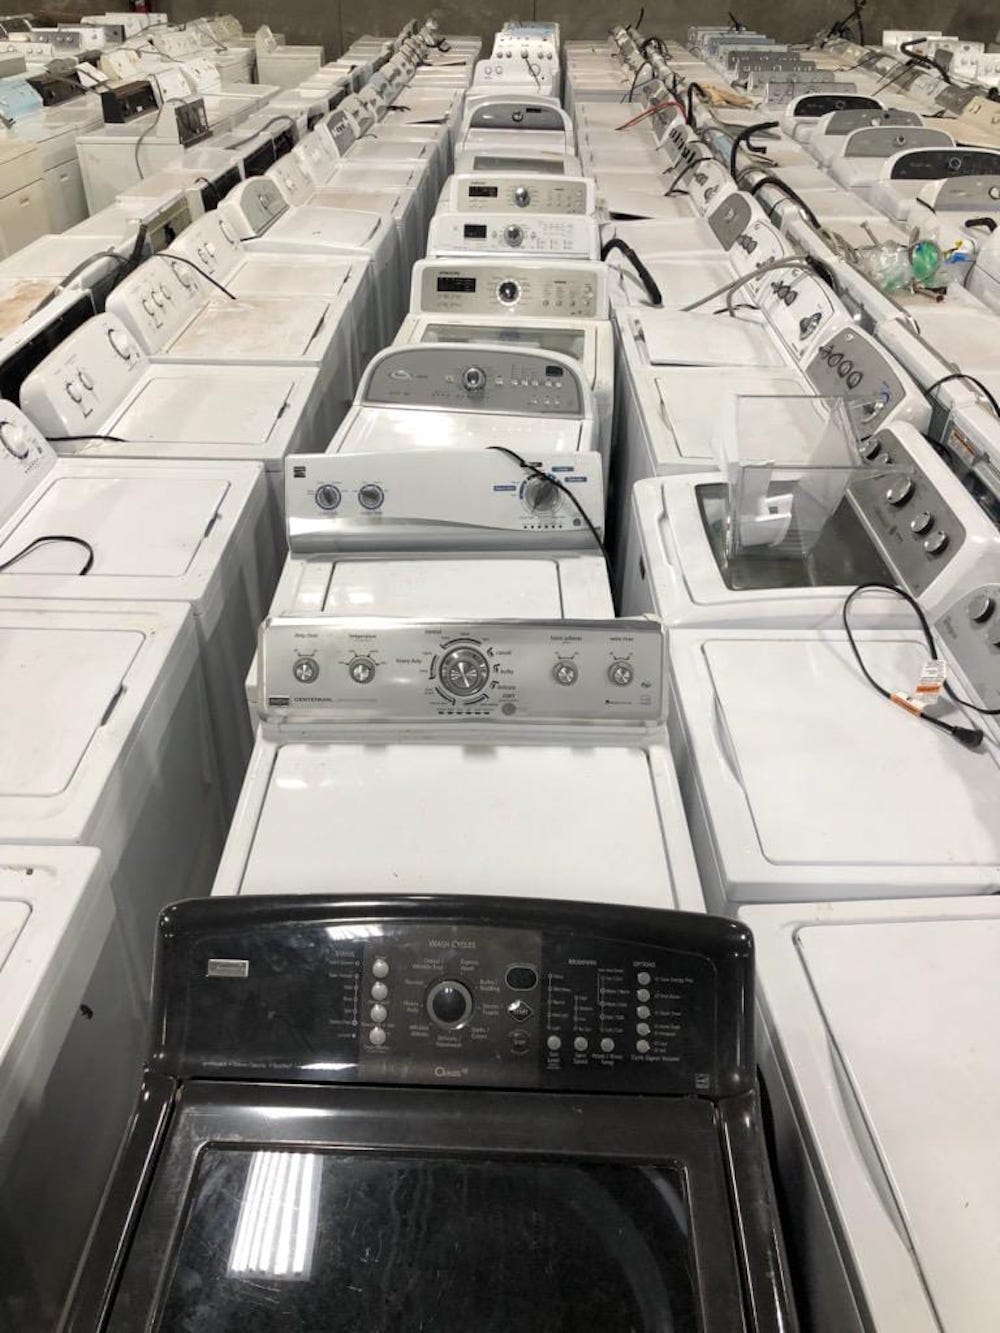 example pictures showing We sell Bulk Used Untested Haul Away Appliances by the truckload!